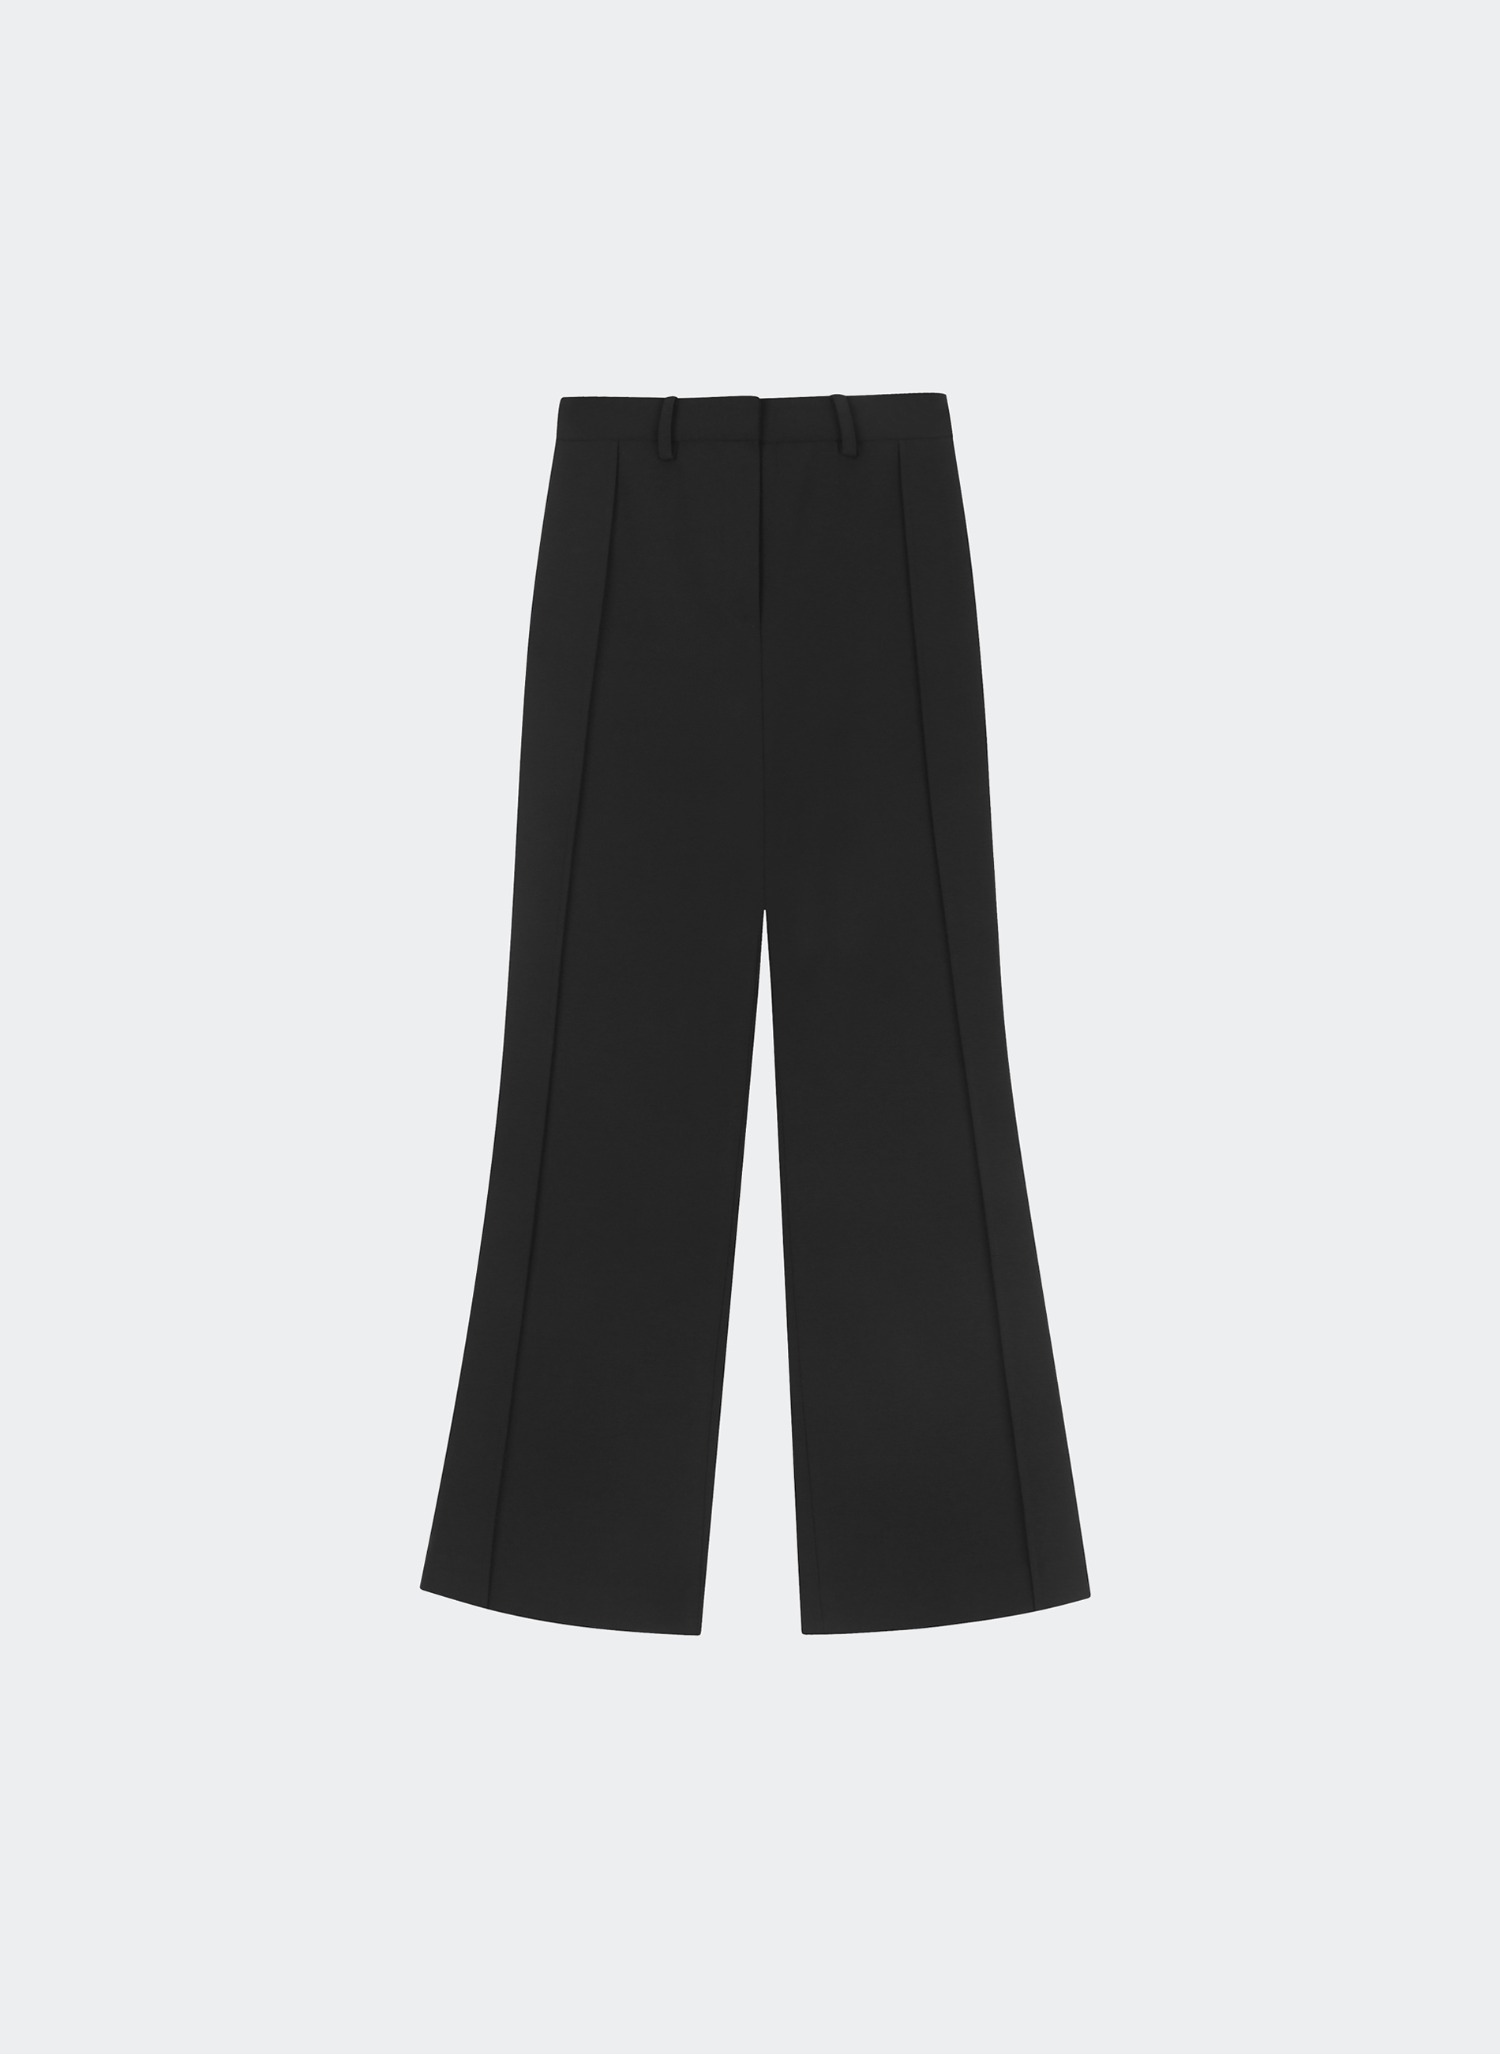 LINED BOOTS CUT TROUSERS BLACK